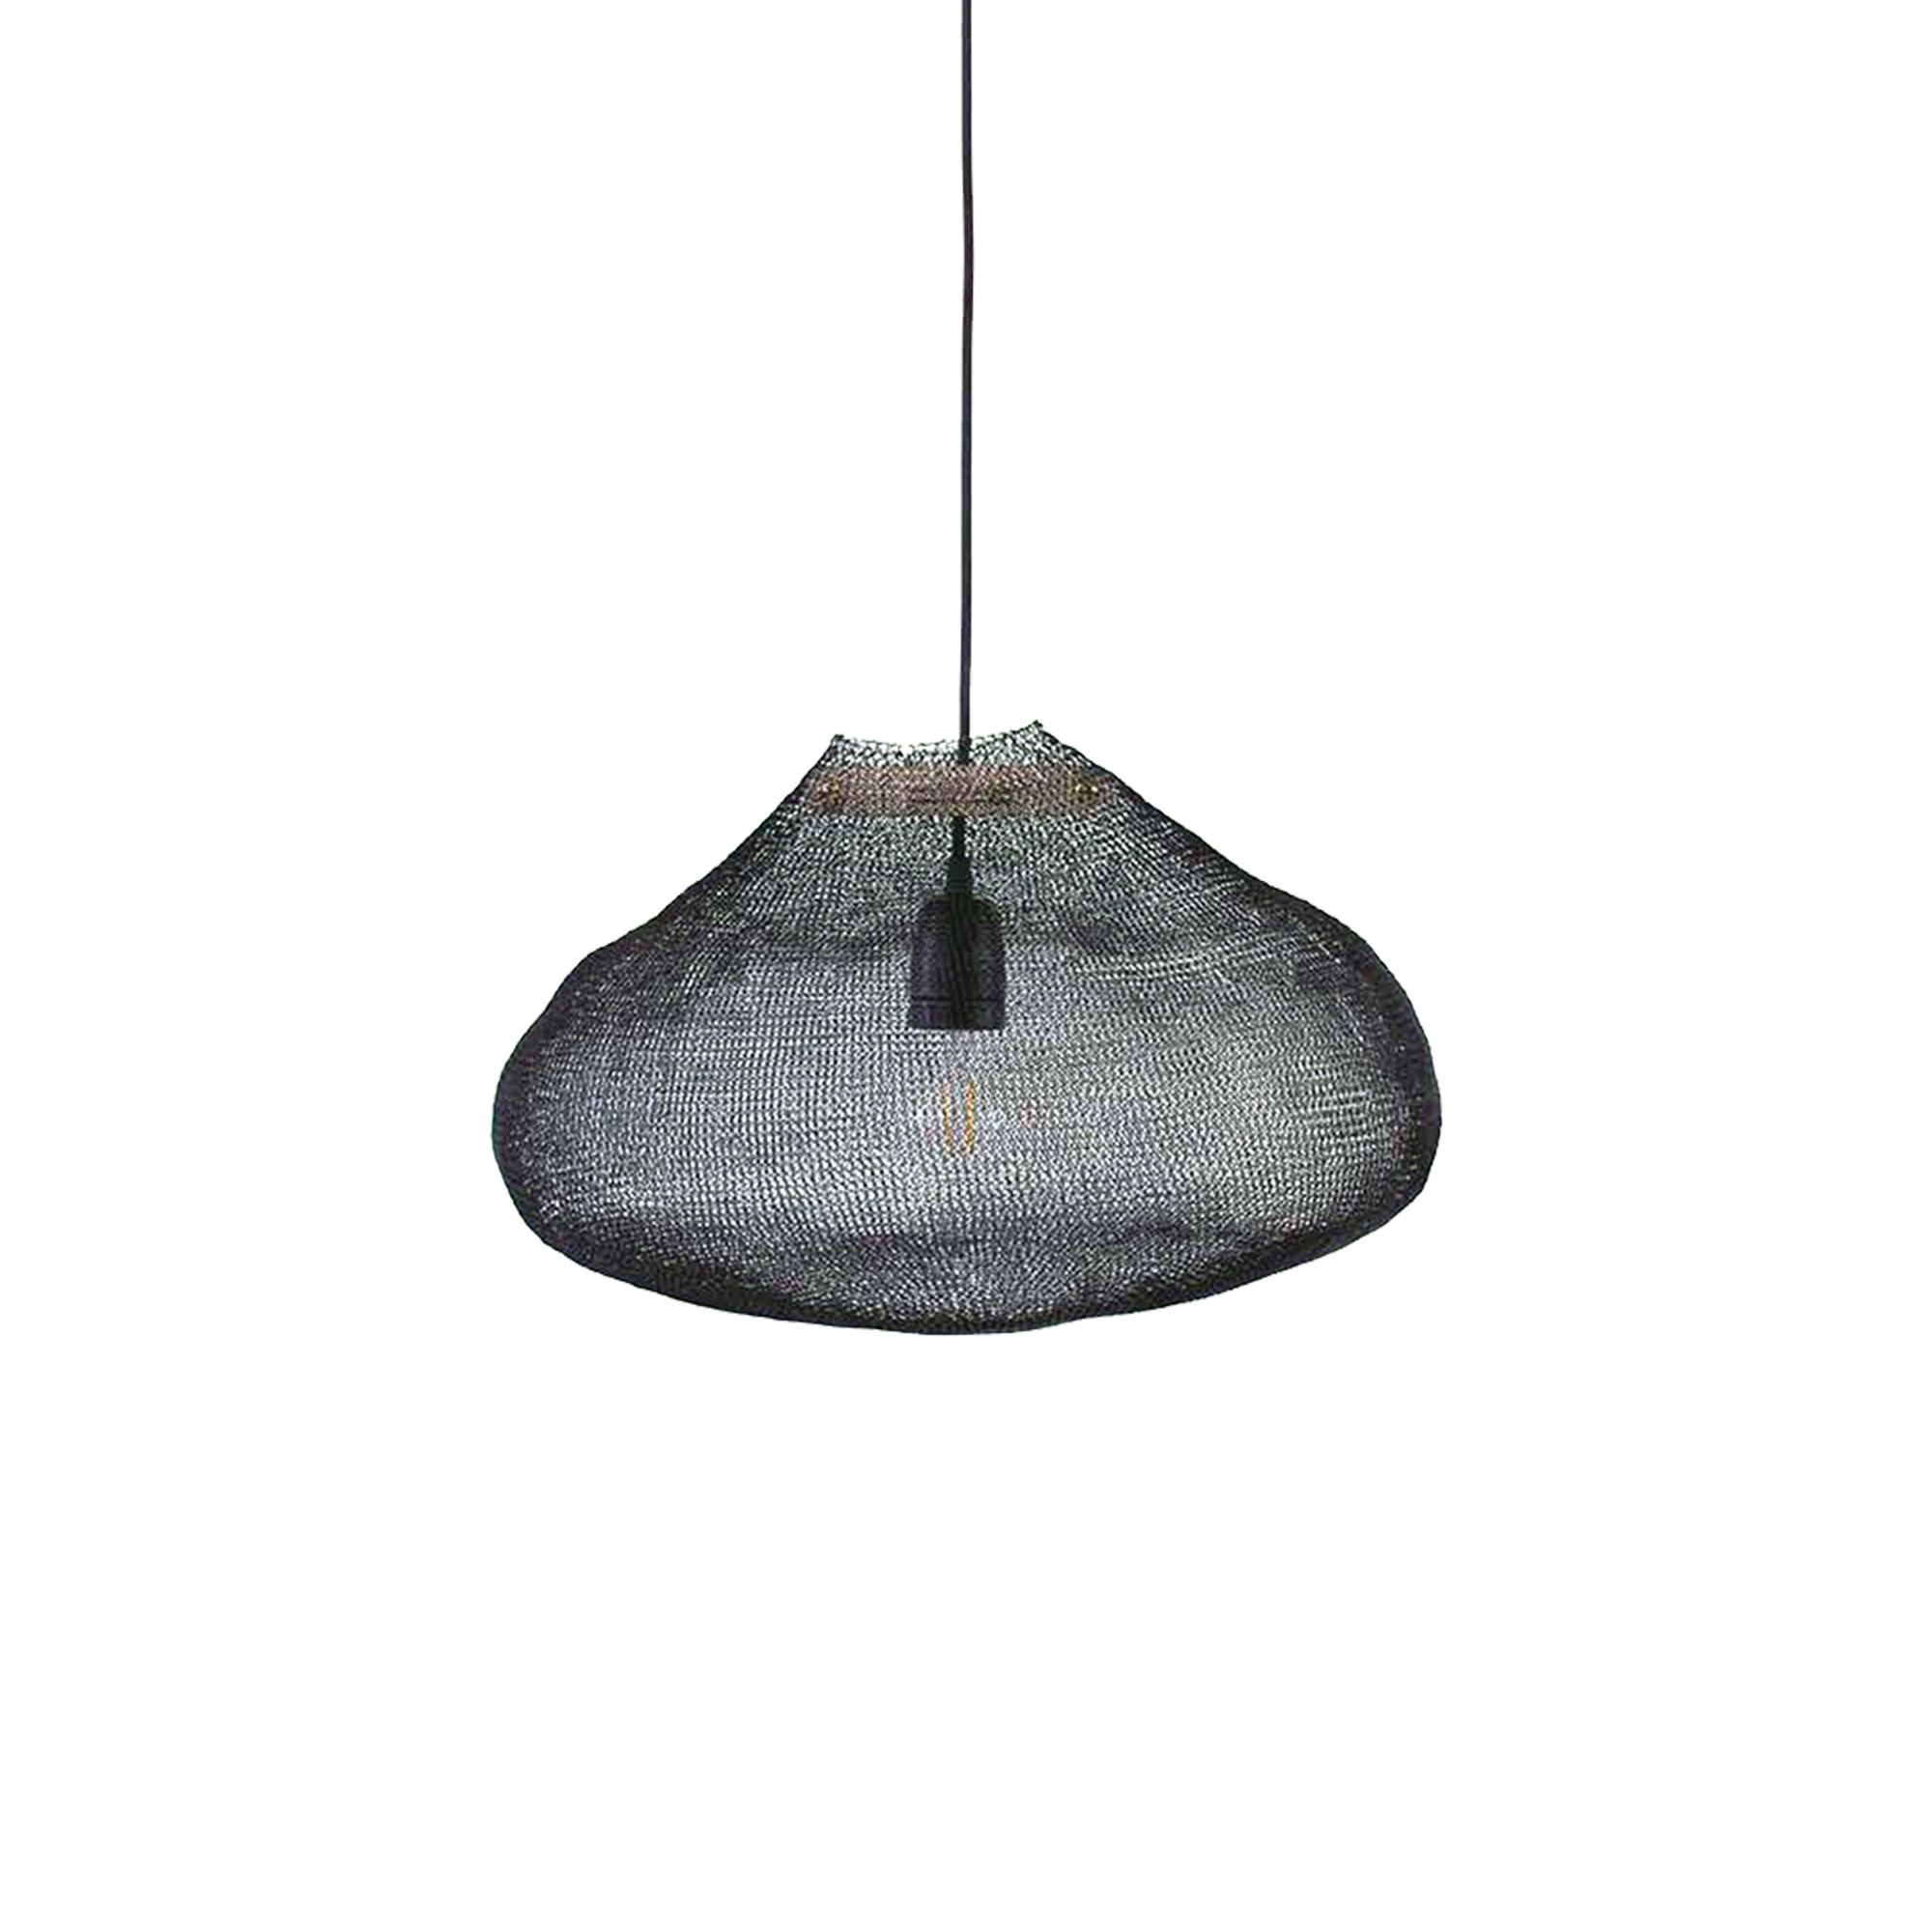 Hand-woven in stainless steel, this pendant light is suitable for indoor and outdoor use (provided you have the appropriate cable and socket).